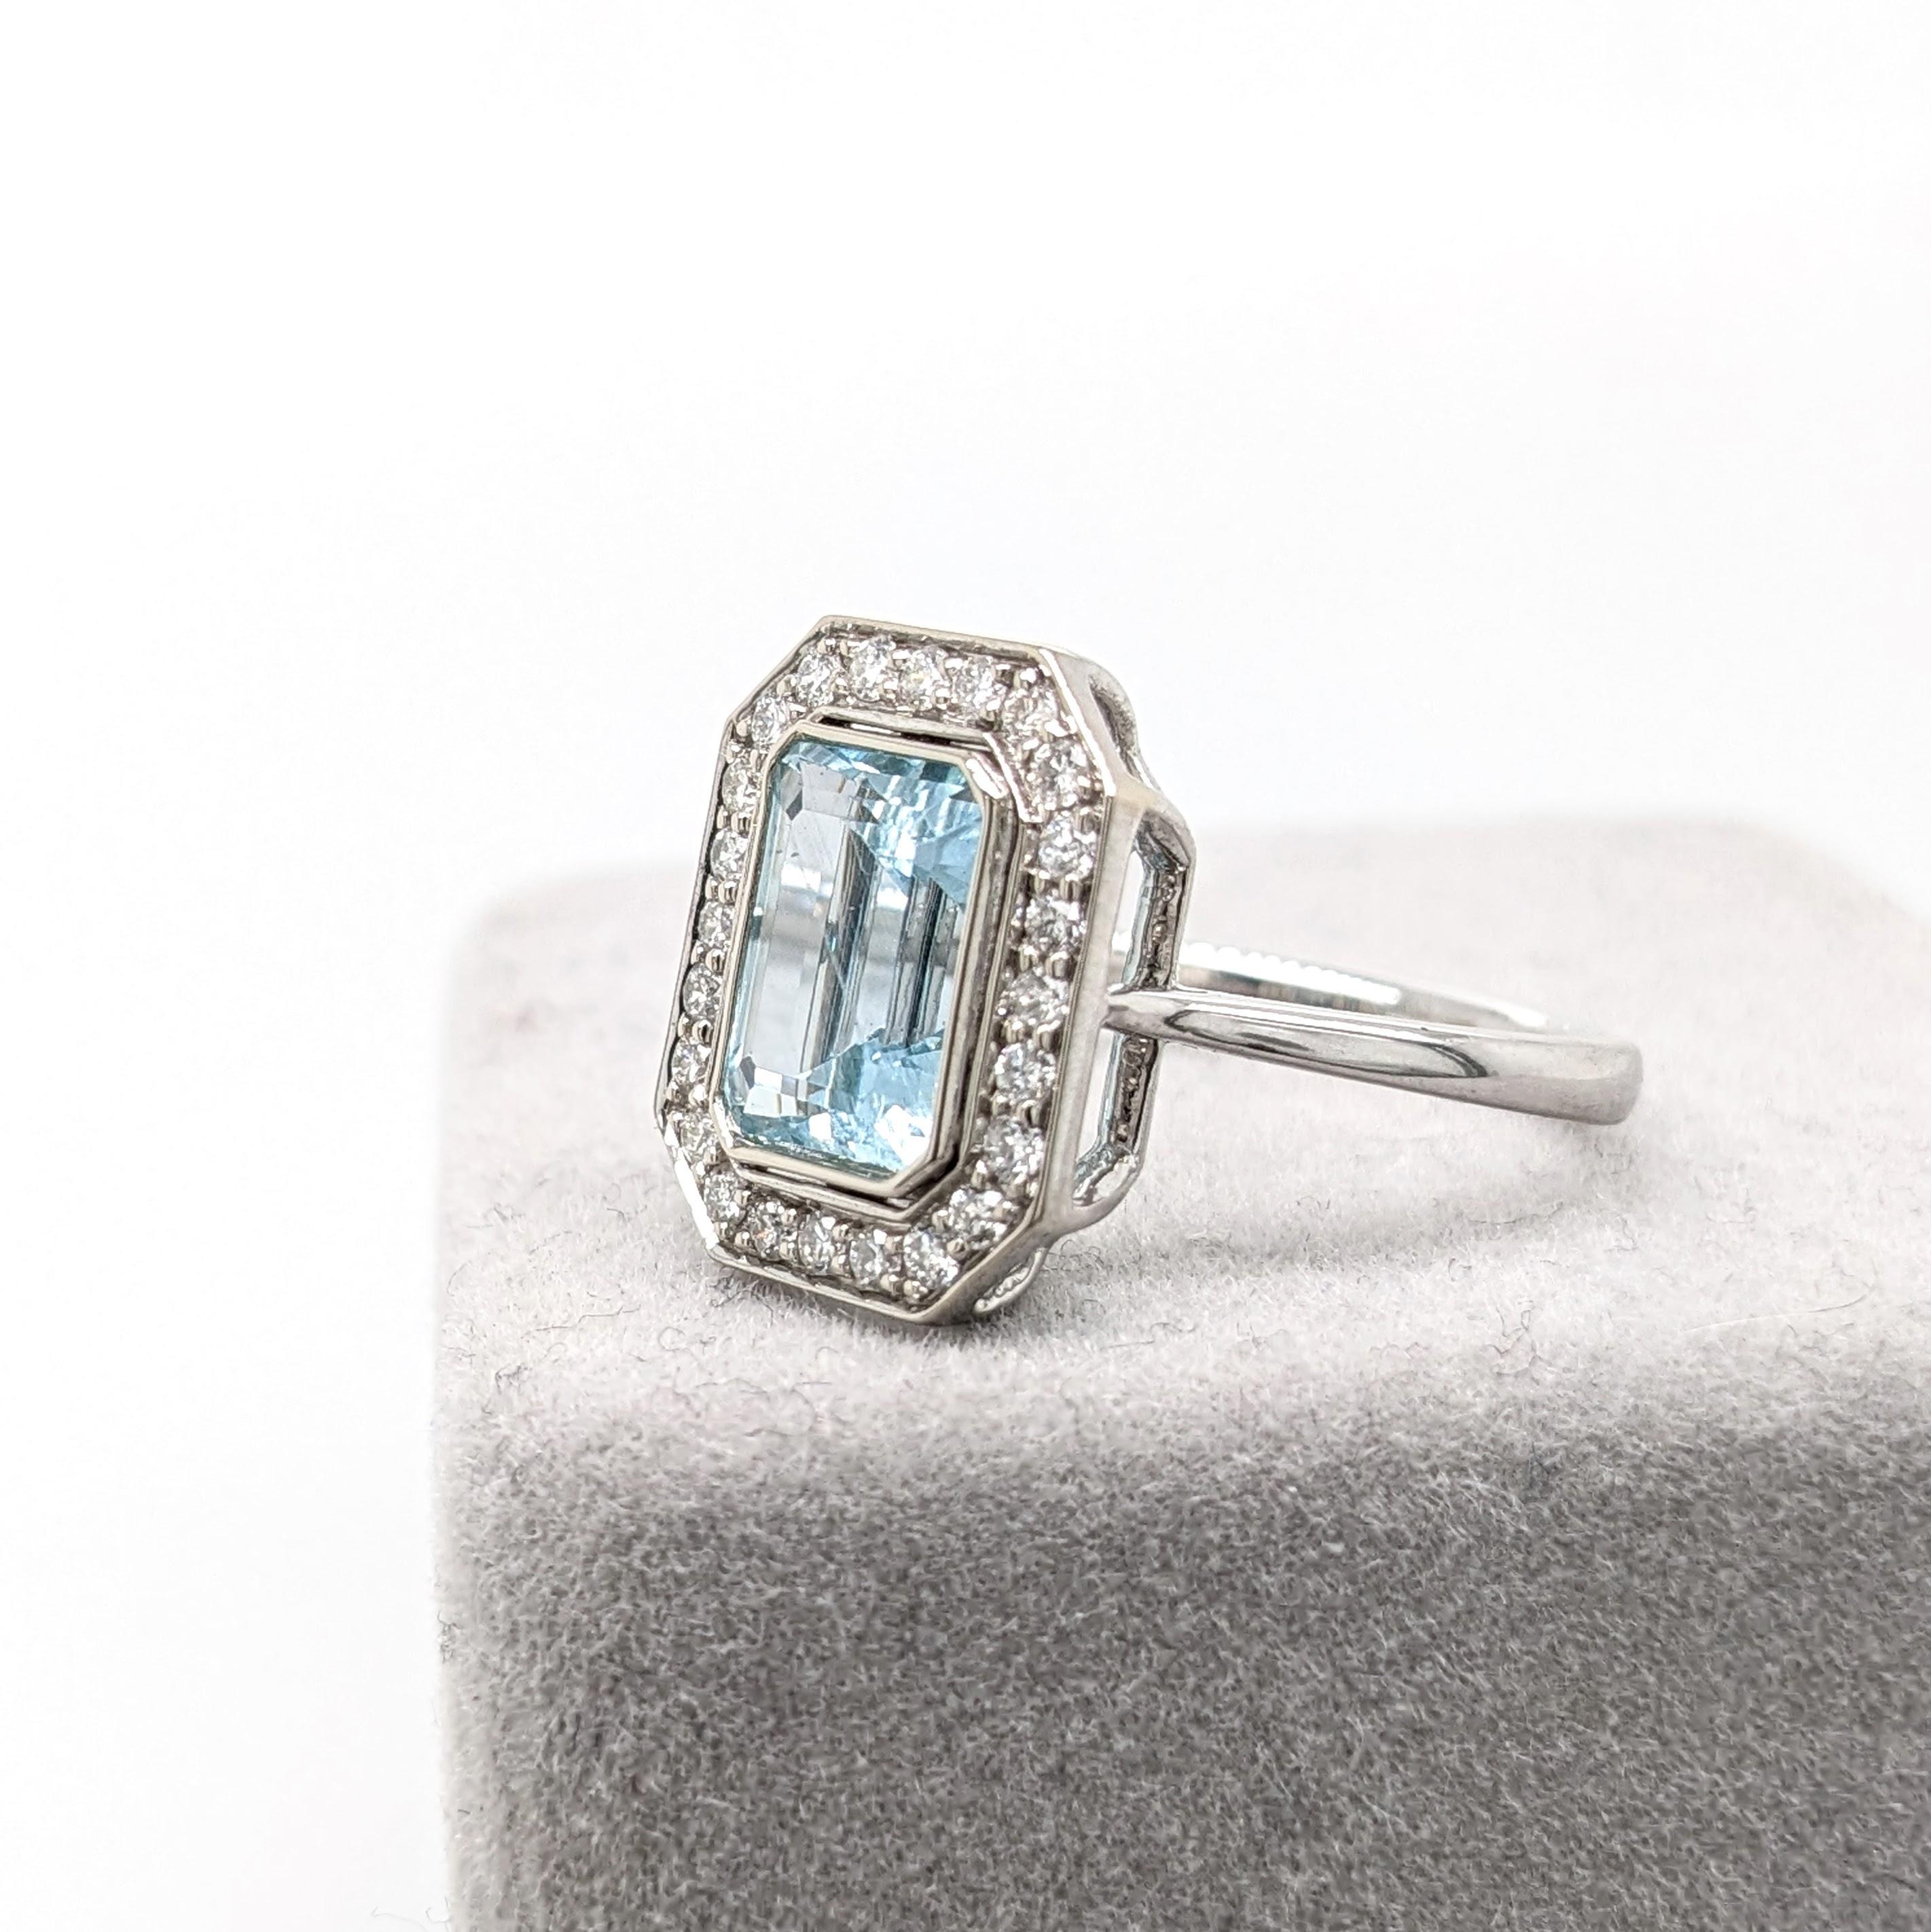 This 14K gold ring setting features a beautiful earth mined Aquamarine with a halo of natural round diamond accents. This statement ring design is perfect for an eye catching engagement or anniversary. This ring also makes a beautiful birthstone